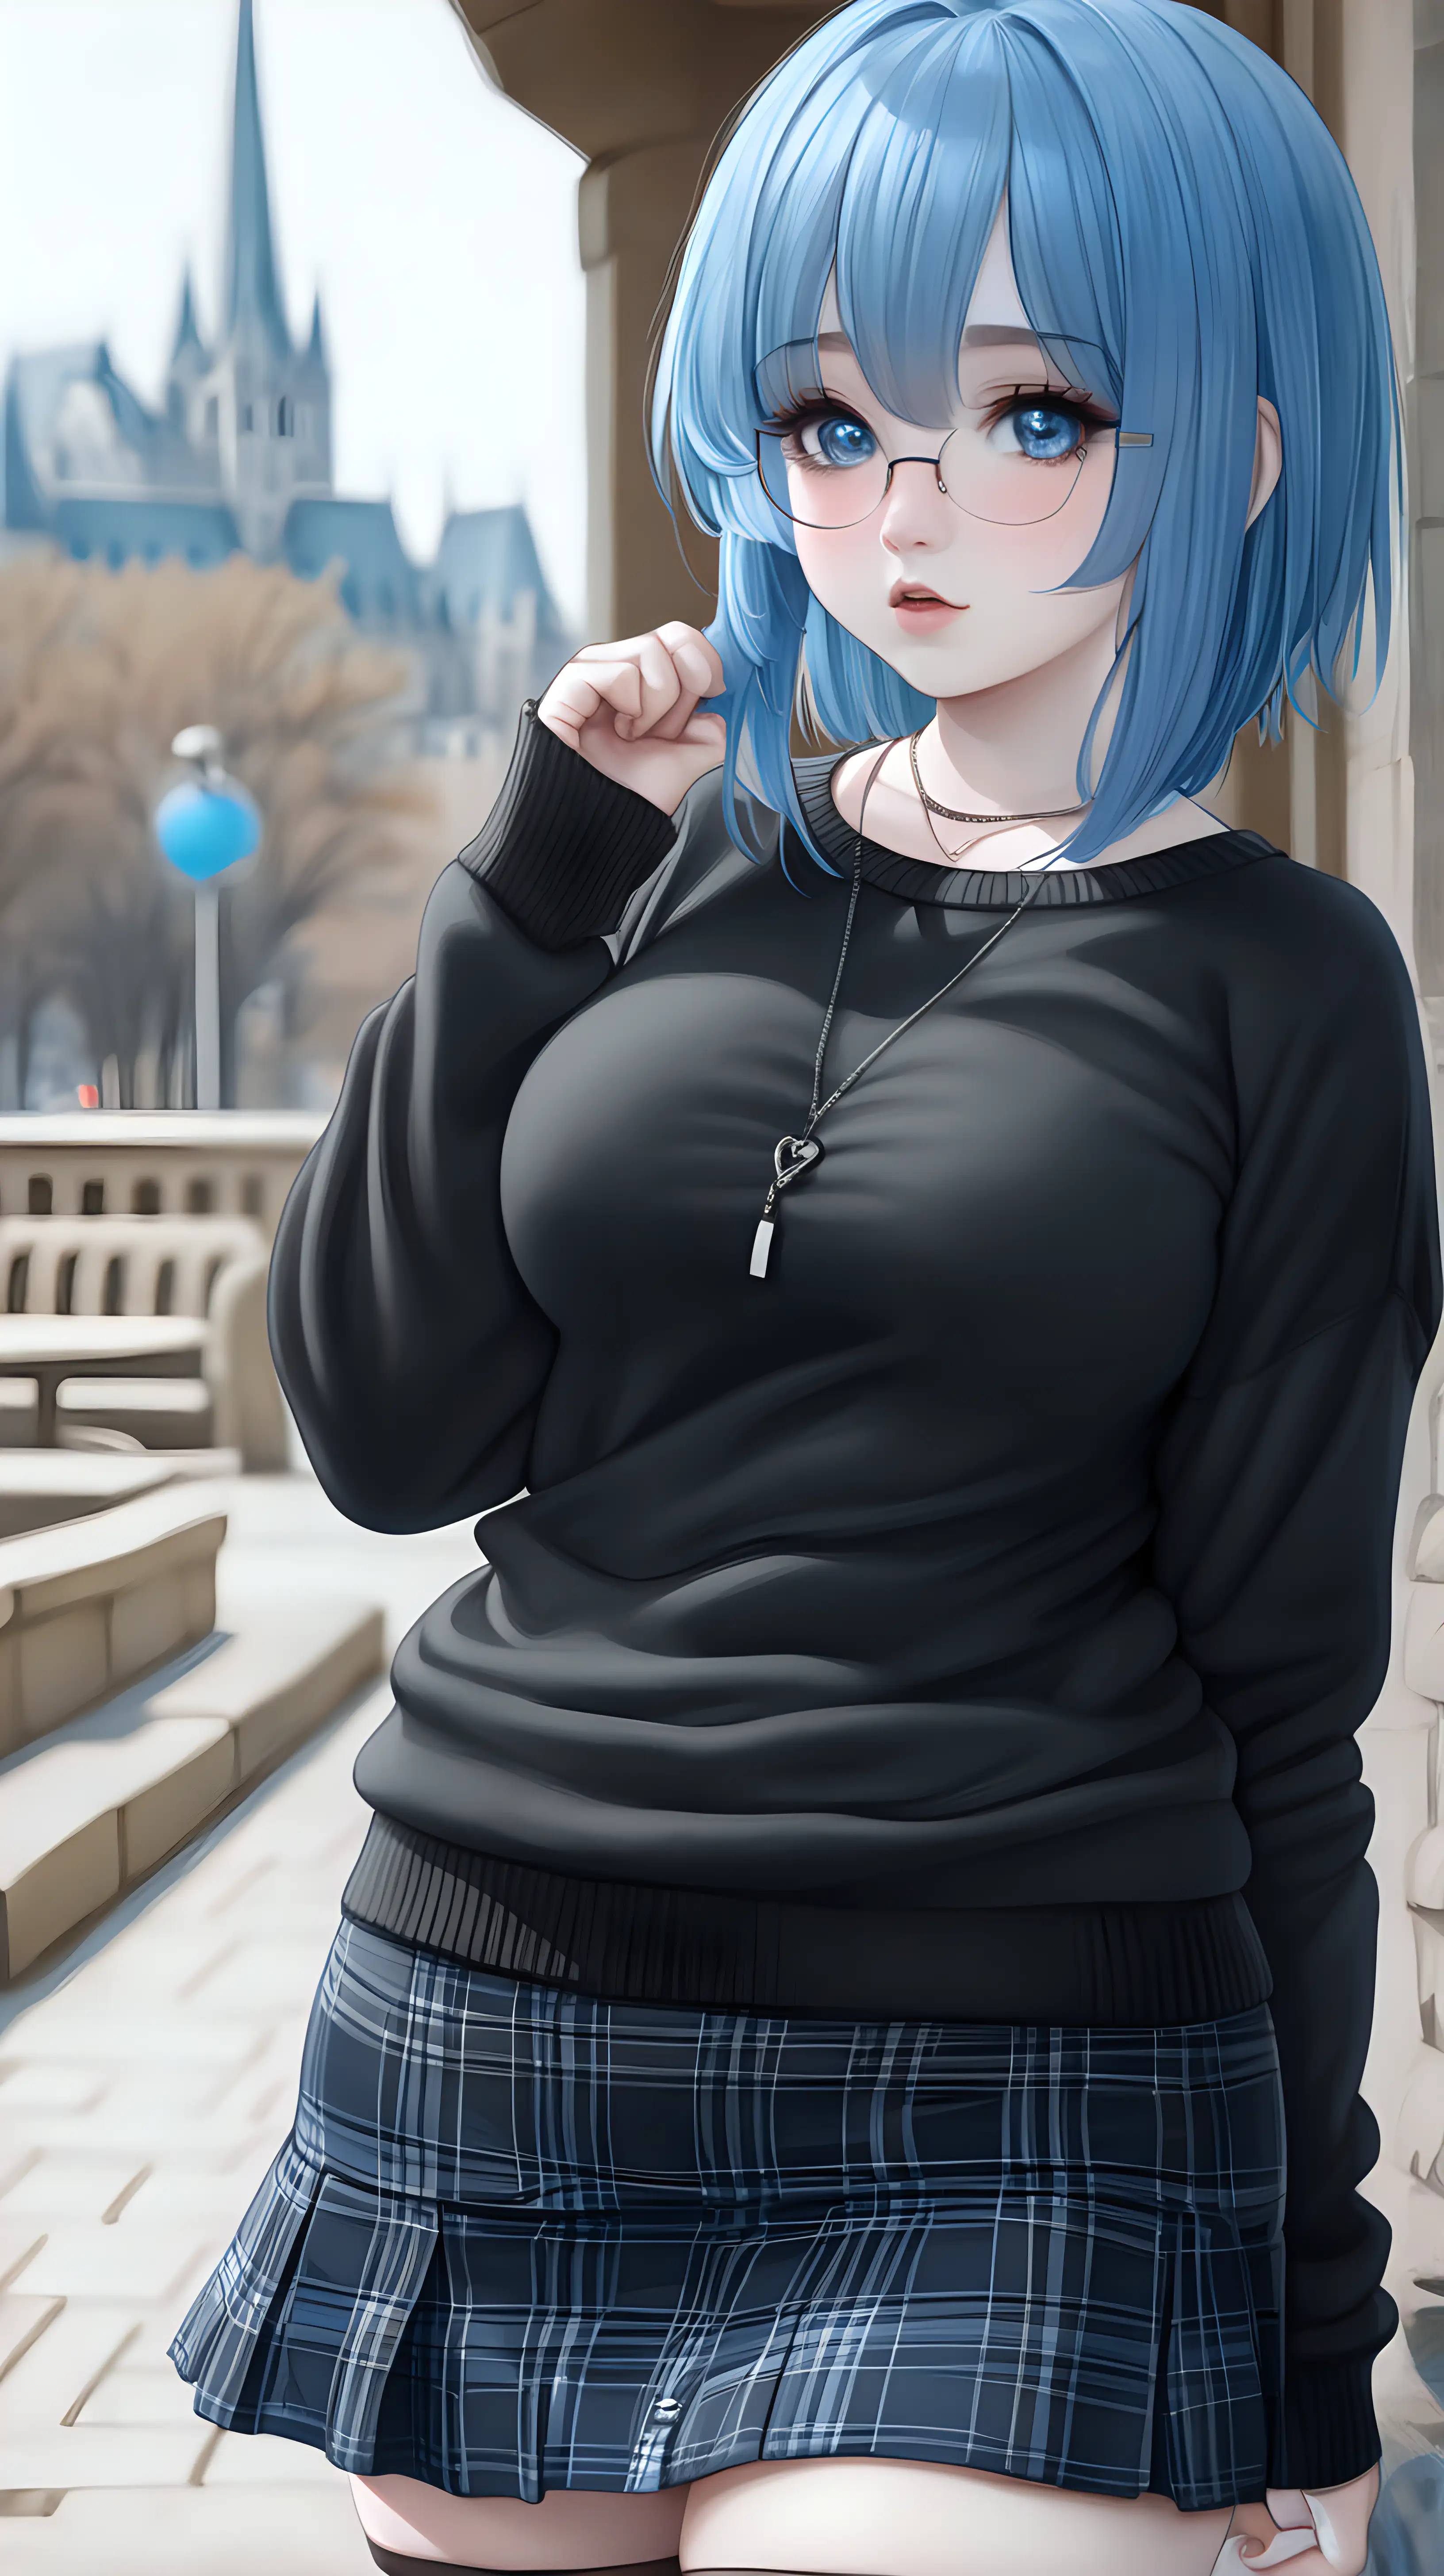 Chubby Girl with Blue Hair in Fashionable Attire